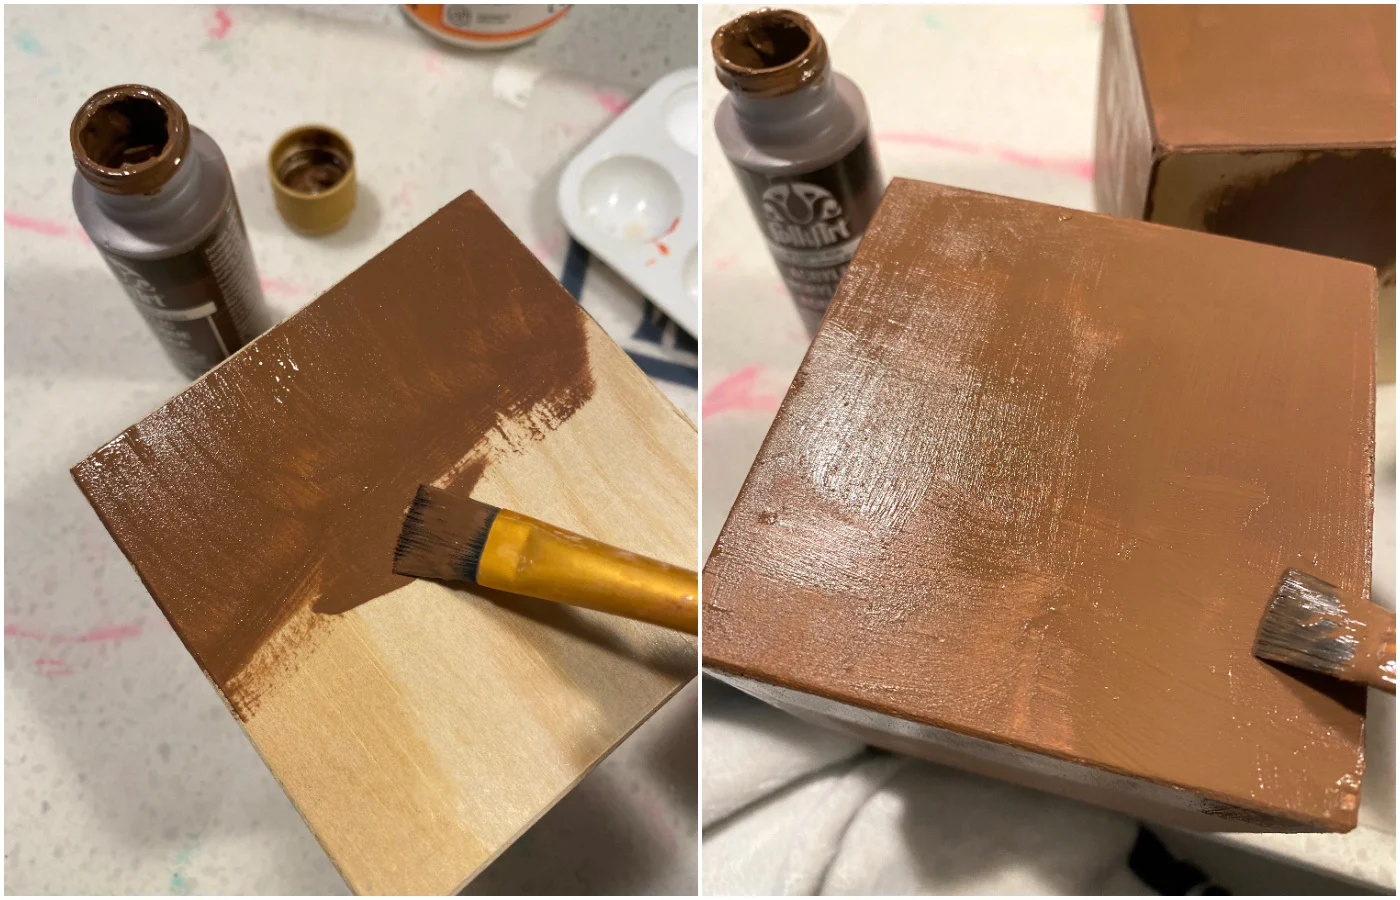 Painting a wood block with brown craft paint